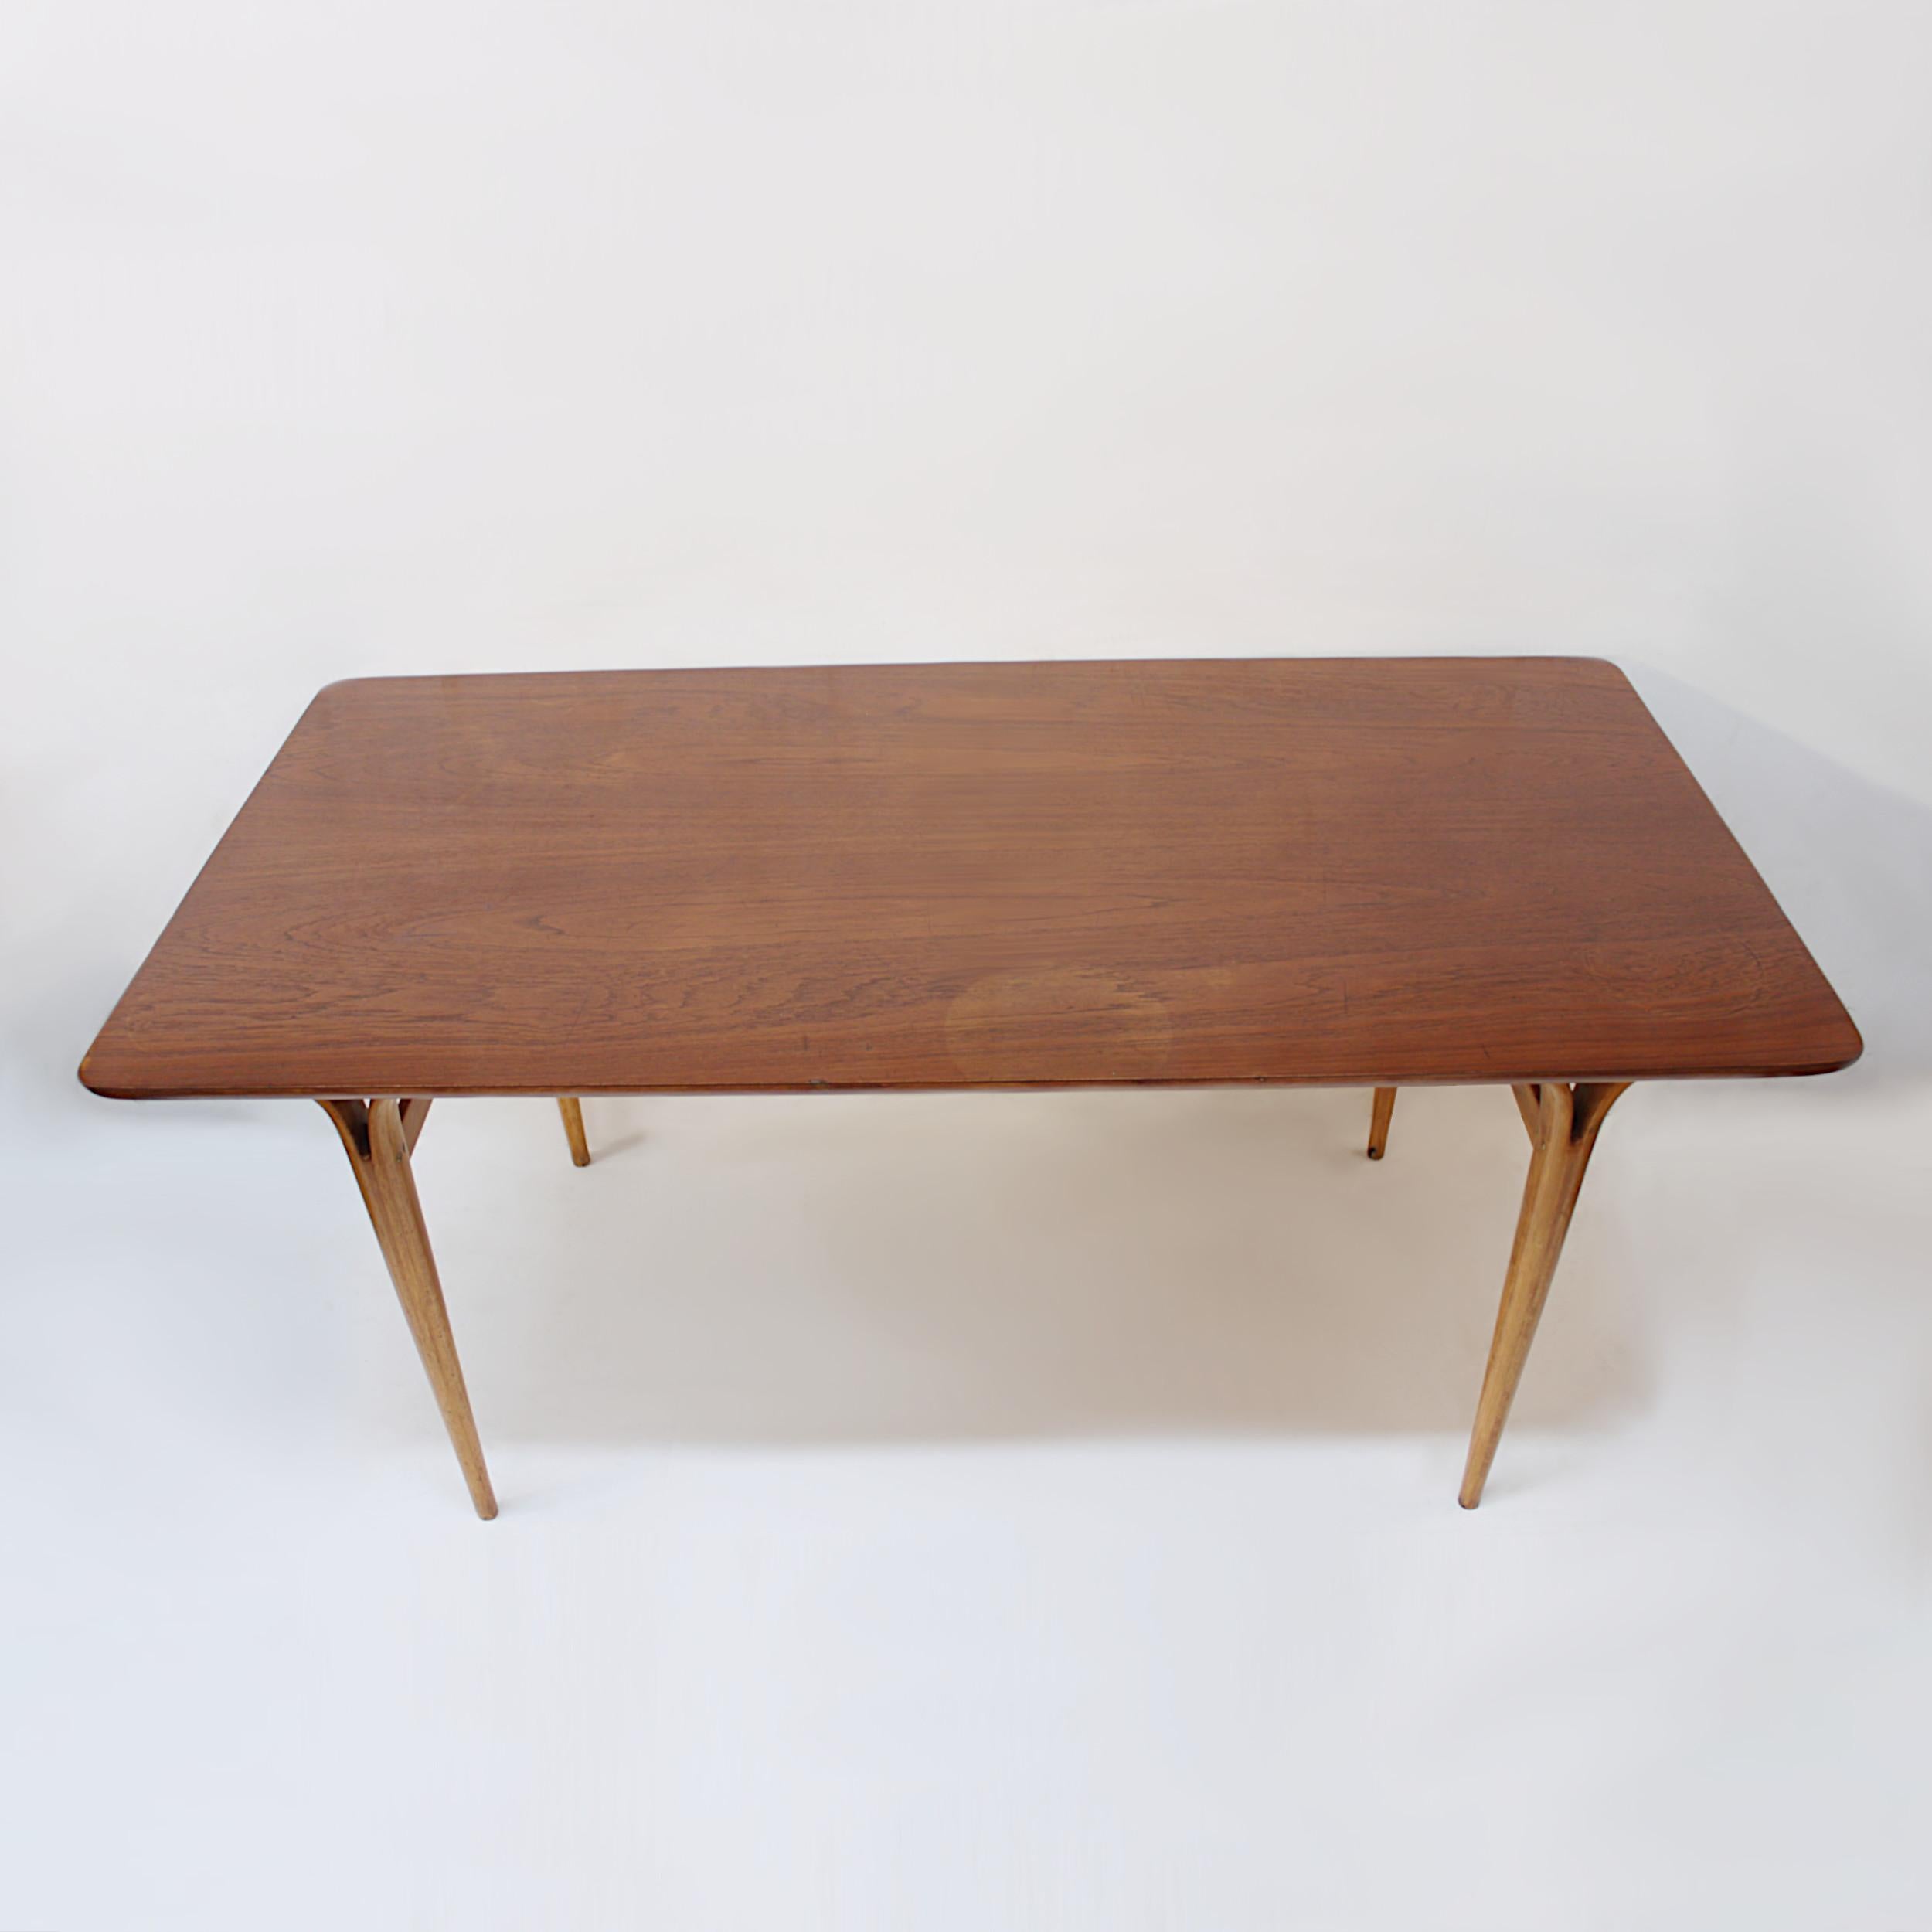 Swedish 1950s Mid-Century Modern Teak and Beech Table with Cleft Legs by Bruno Mathsson